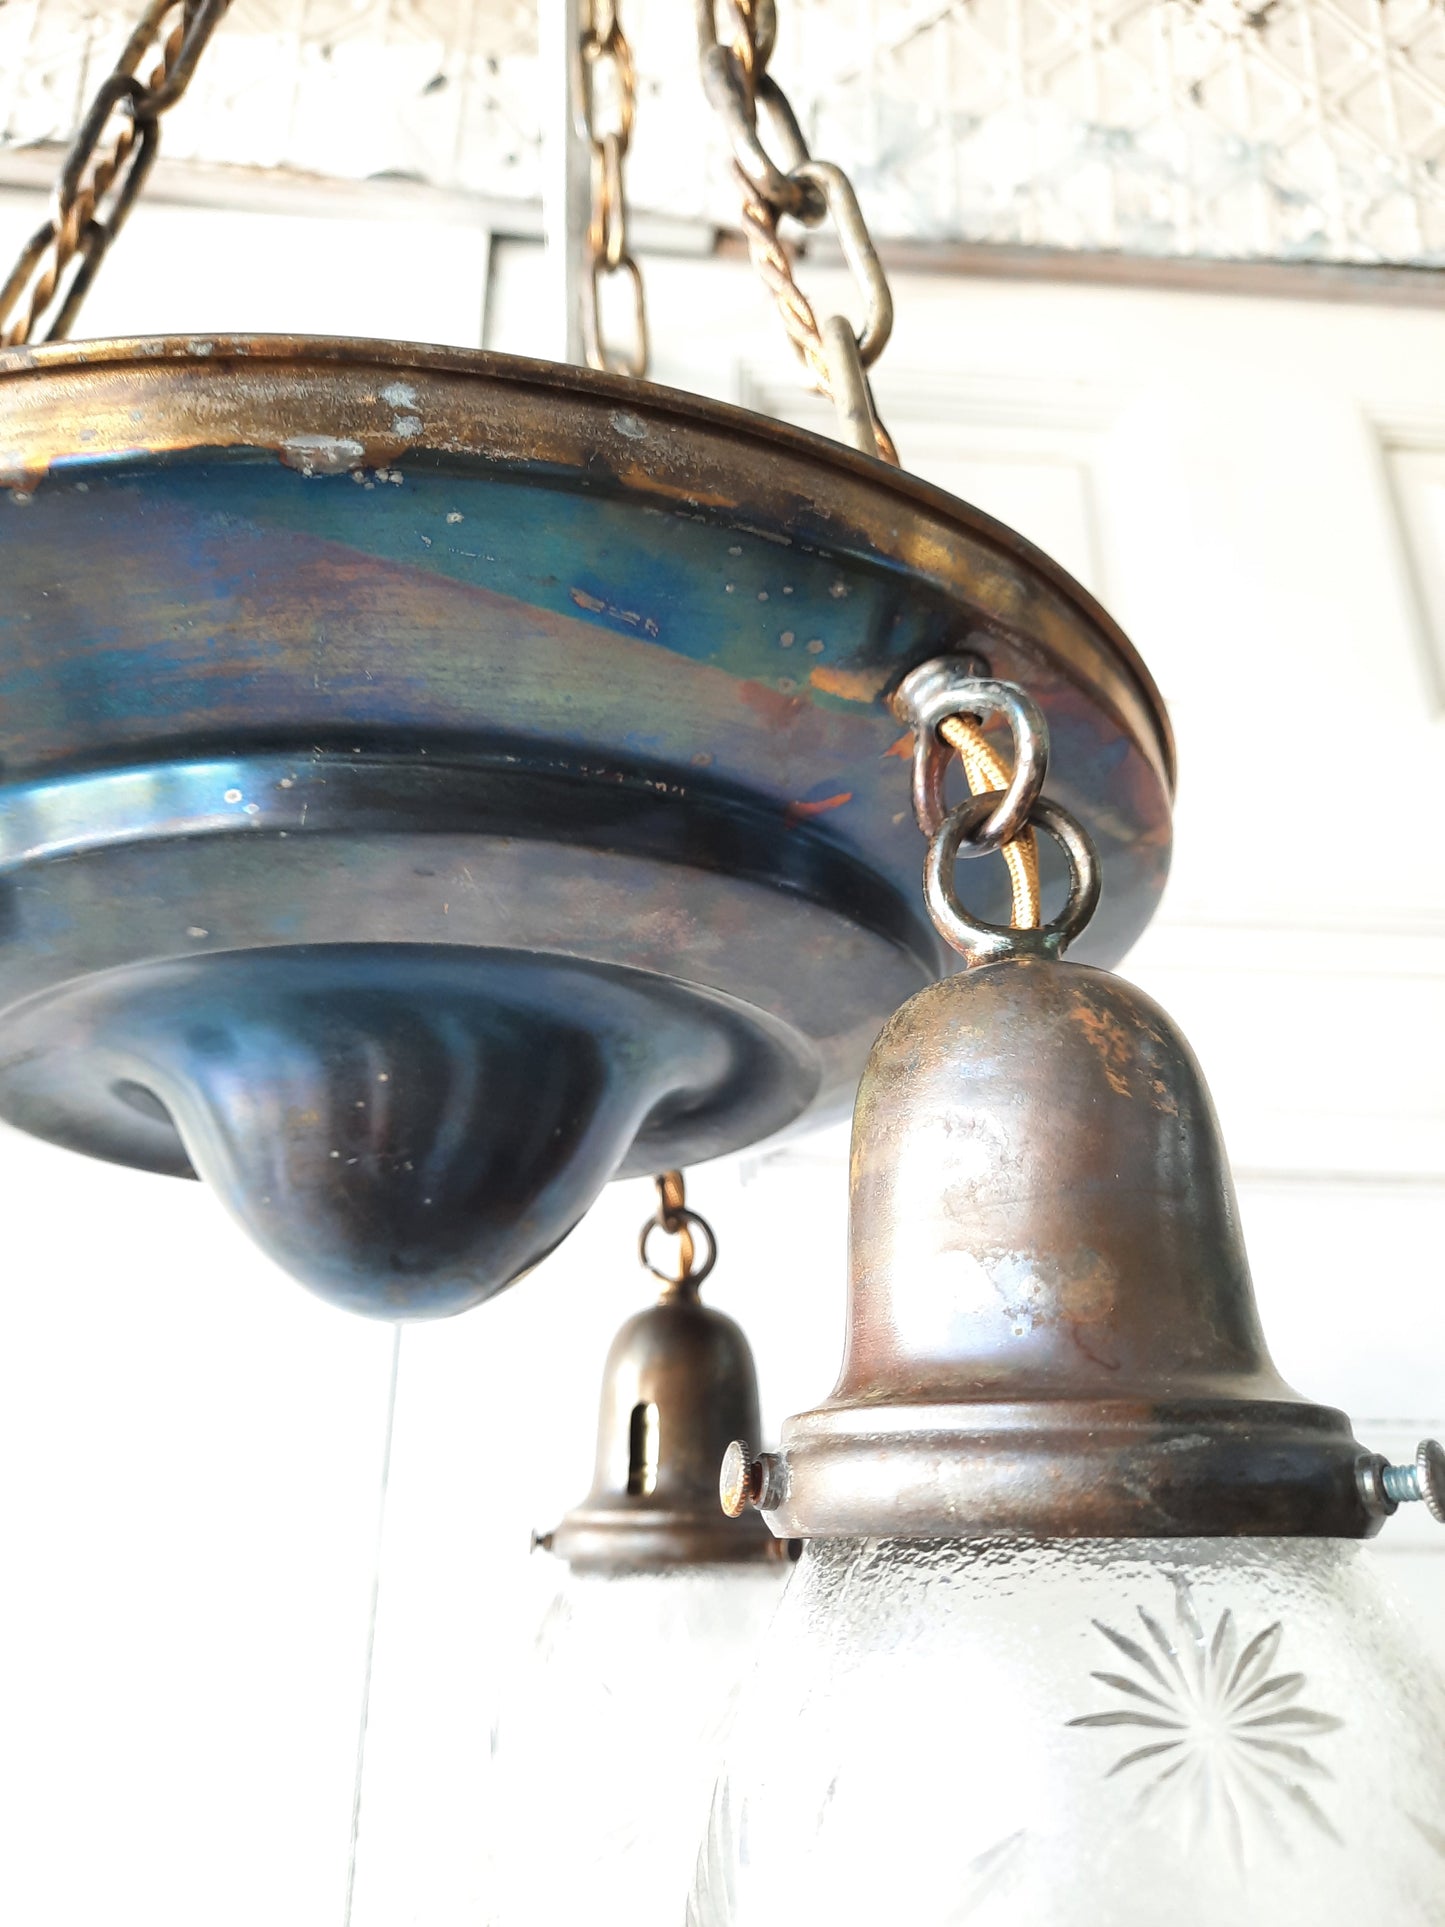 Brass Pan Light with Cut Glass Shades, 1900s Vintage Three Chain Chandelier with Glass Shades